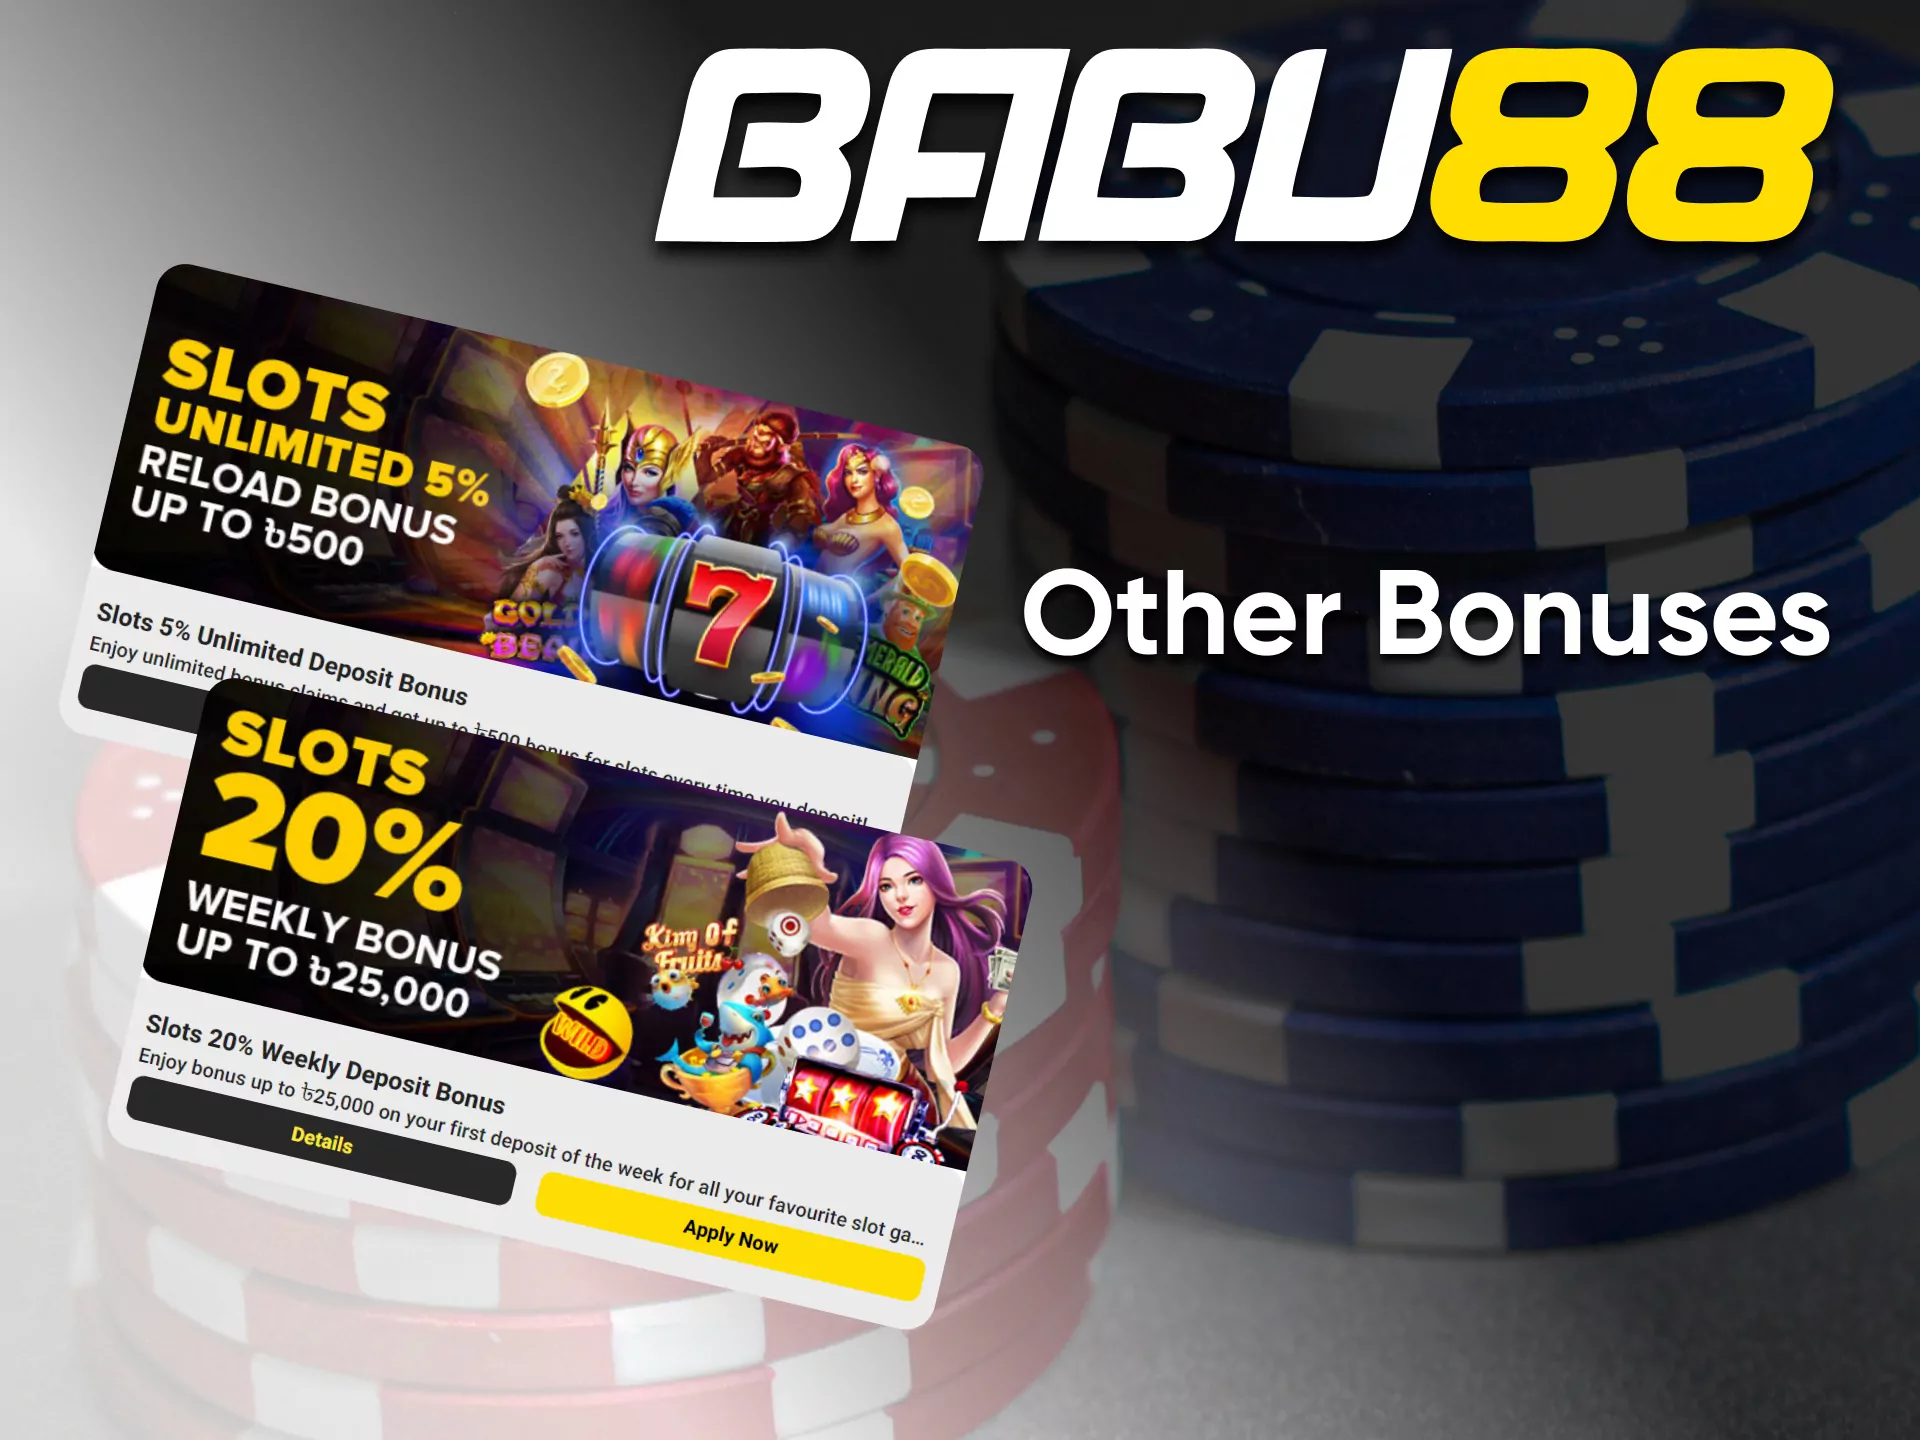 By playing games from Babu88 casino you get a lot of bonuses.